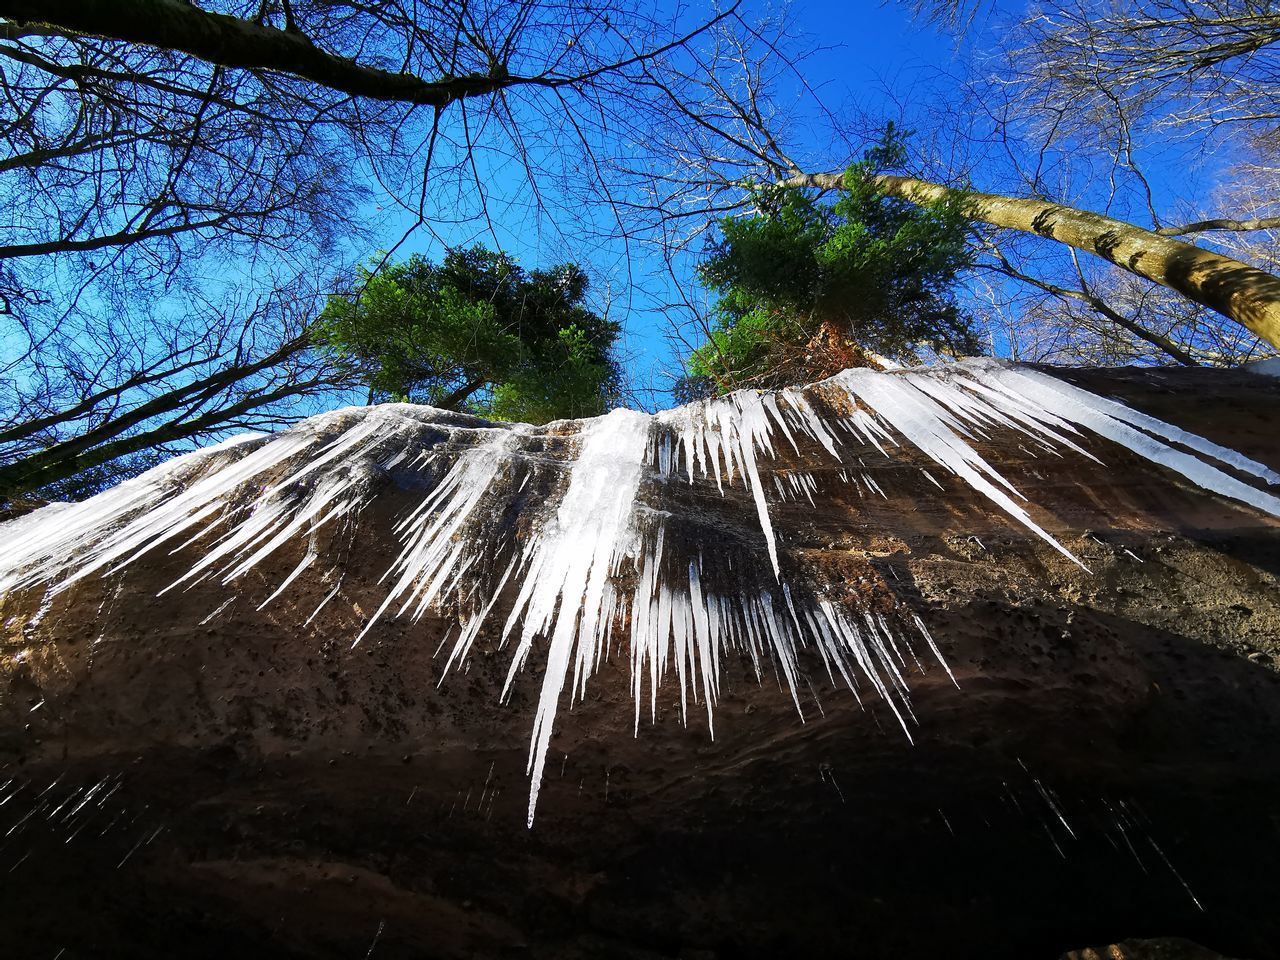 LOW ANGLE VIEW OF ICICLES AGAINST TREES